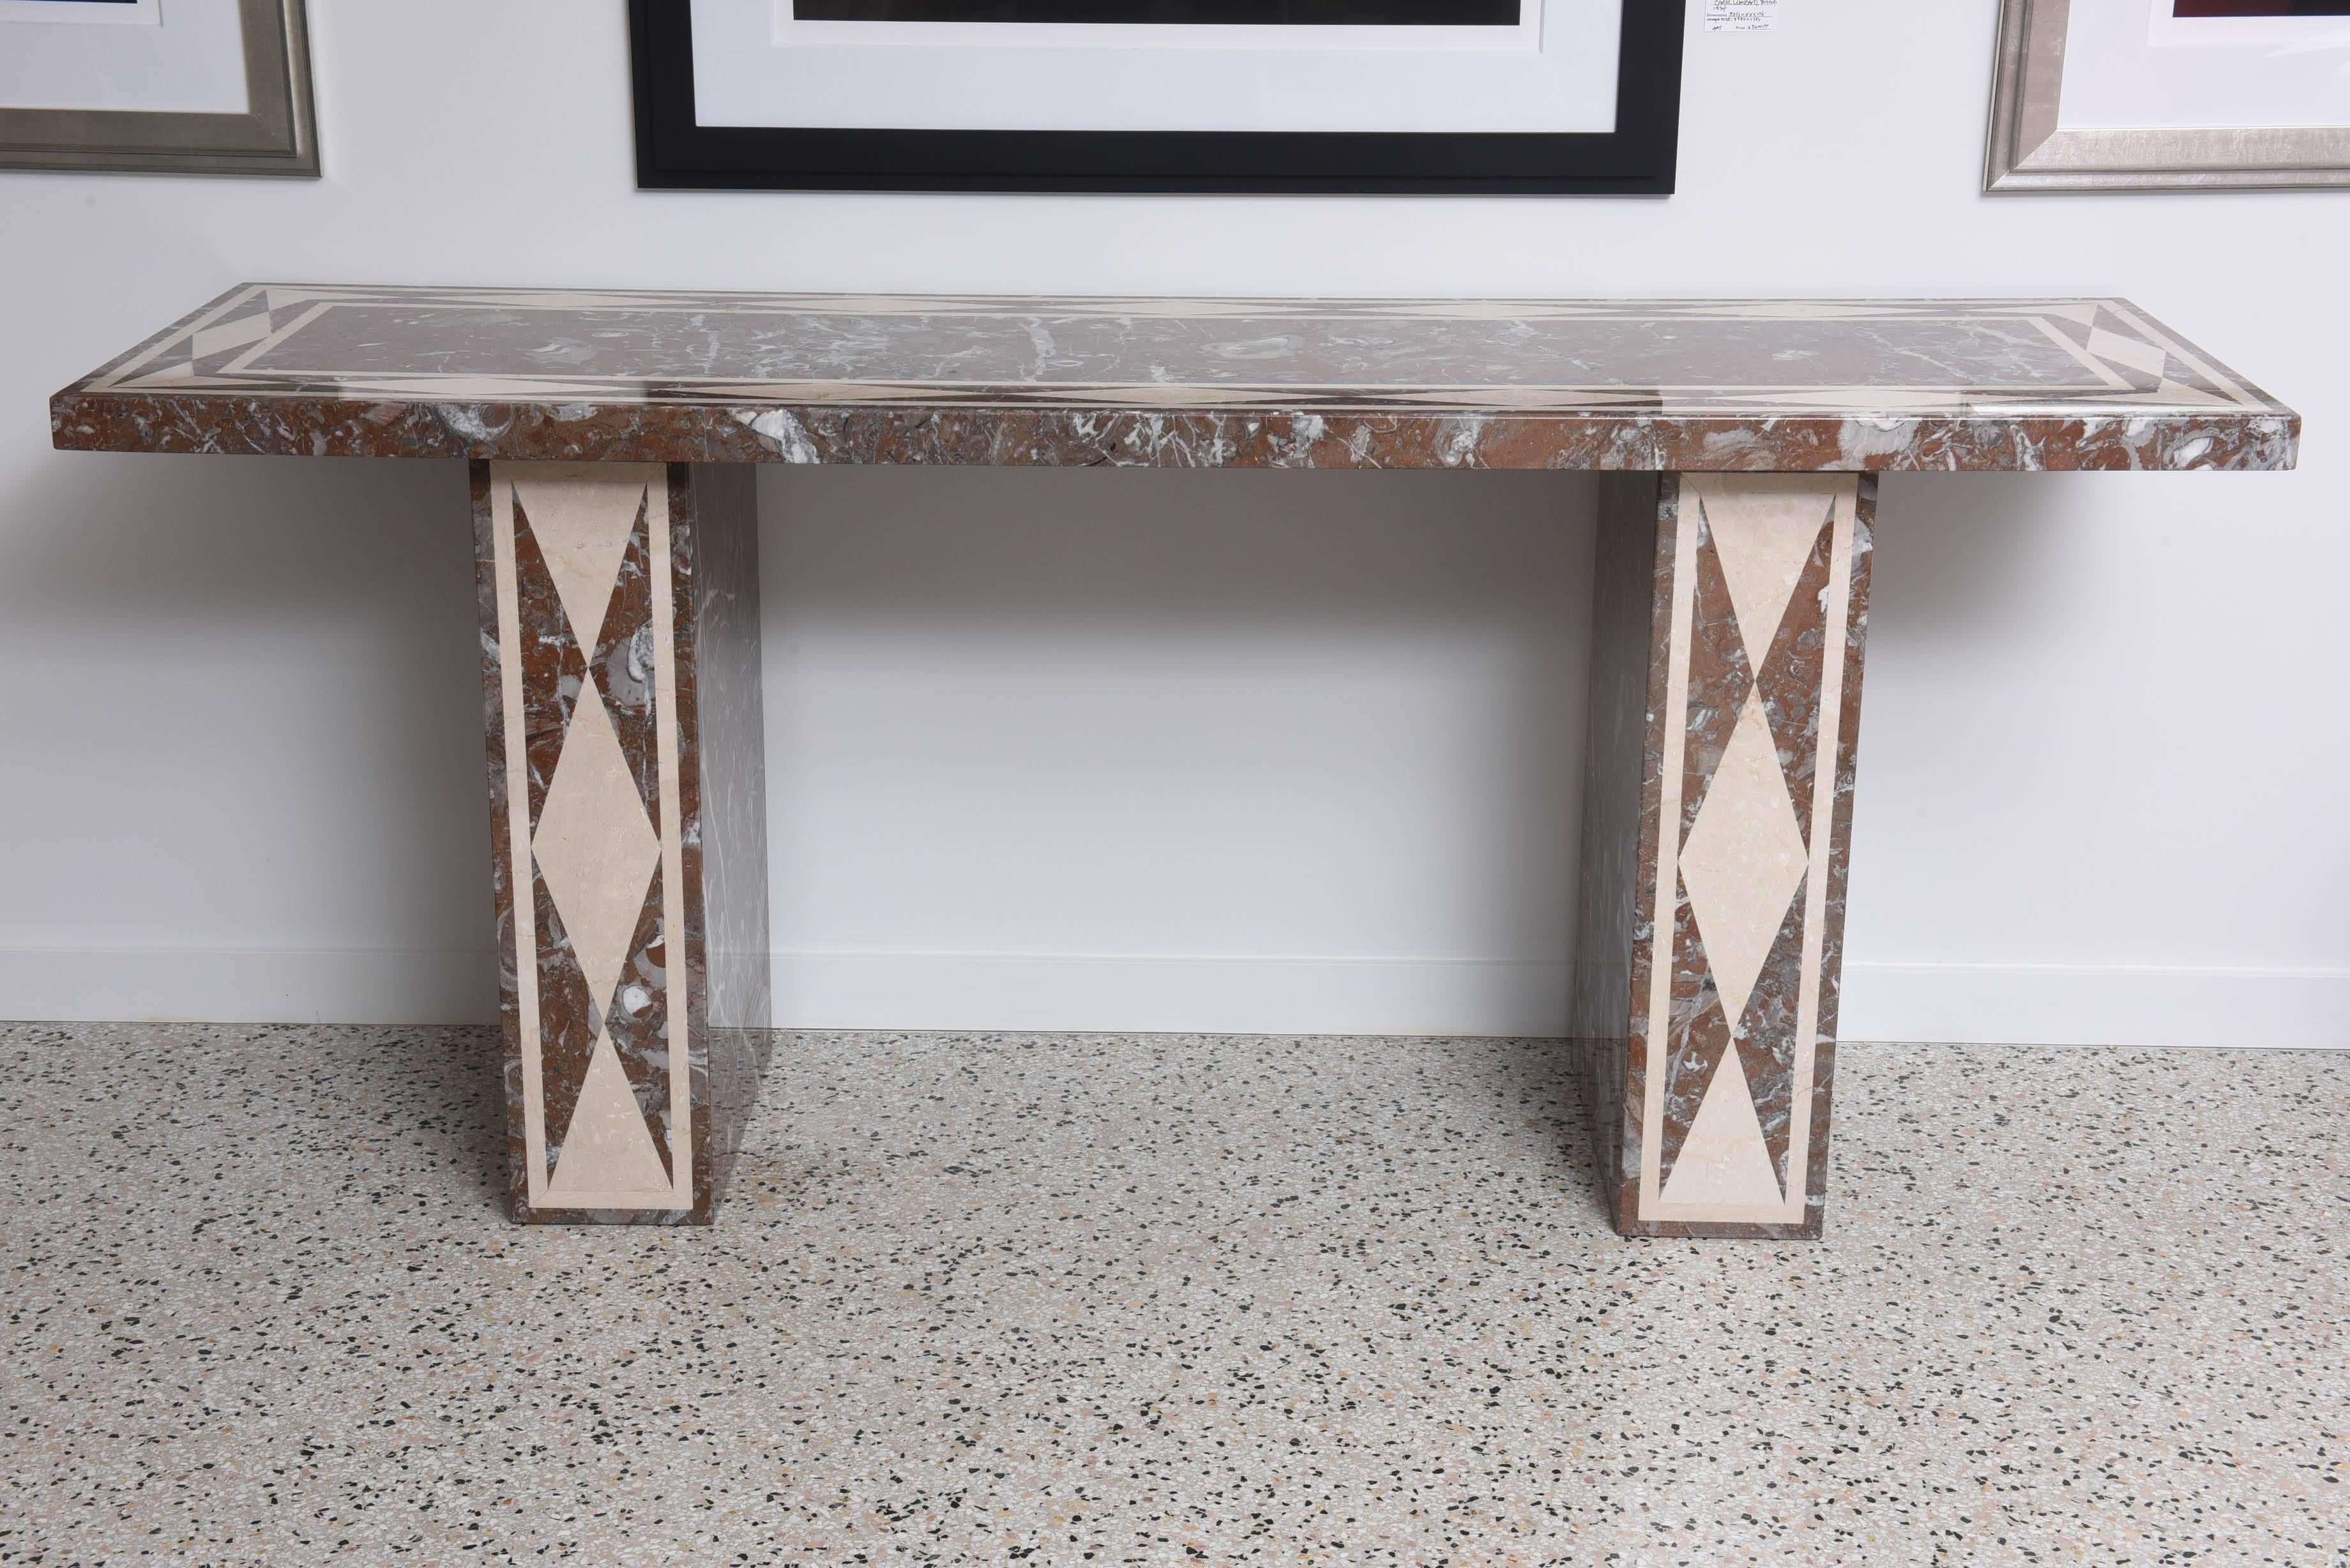 The main body of this console table is composed of red-variegated marble with inset ivory marble. The top is inset with a double-lined border with a diamond pattern as are the front of the legs. 

